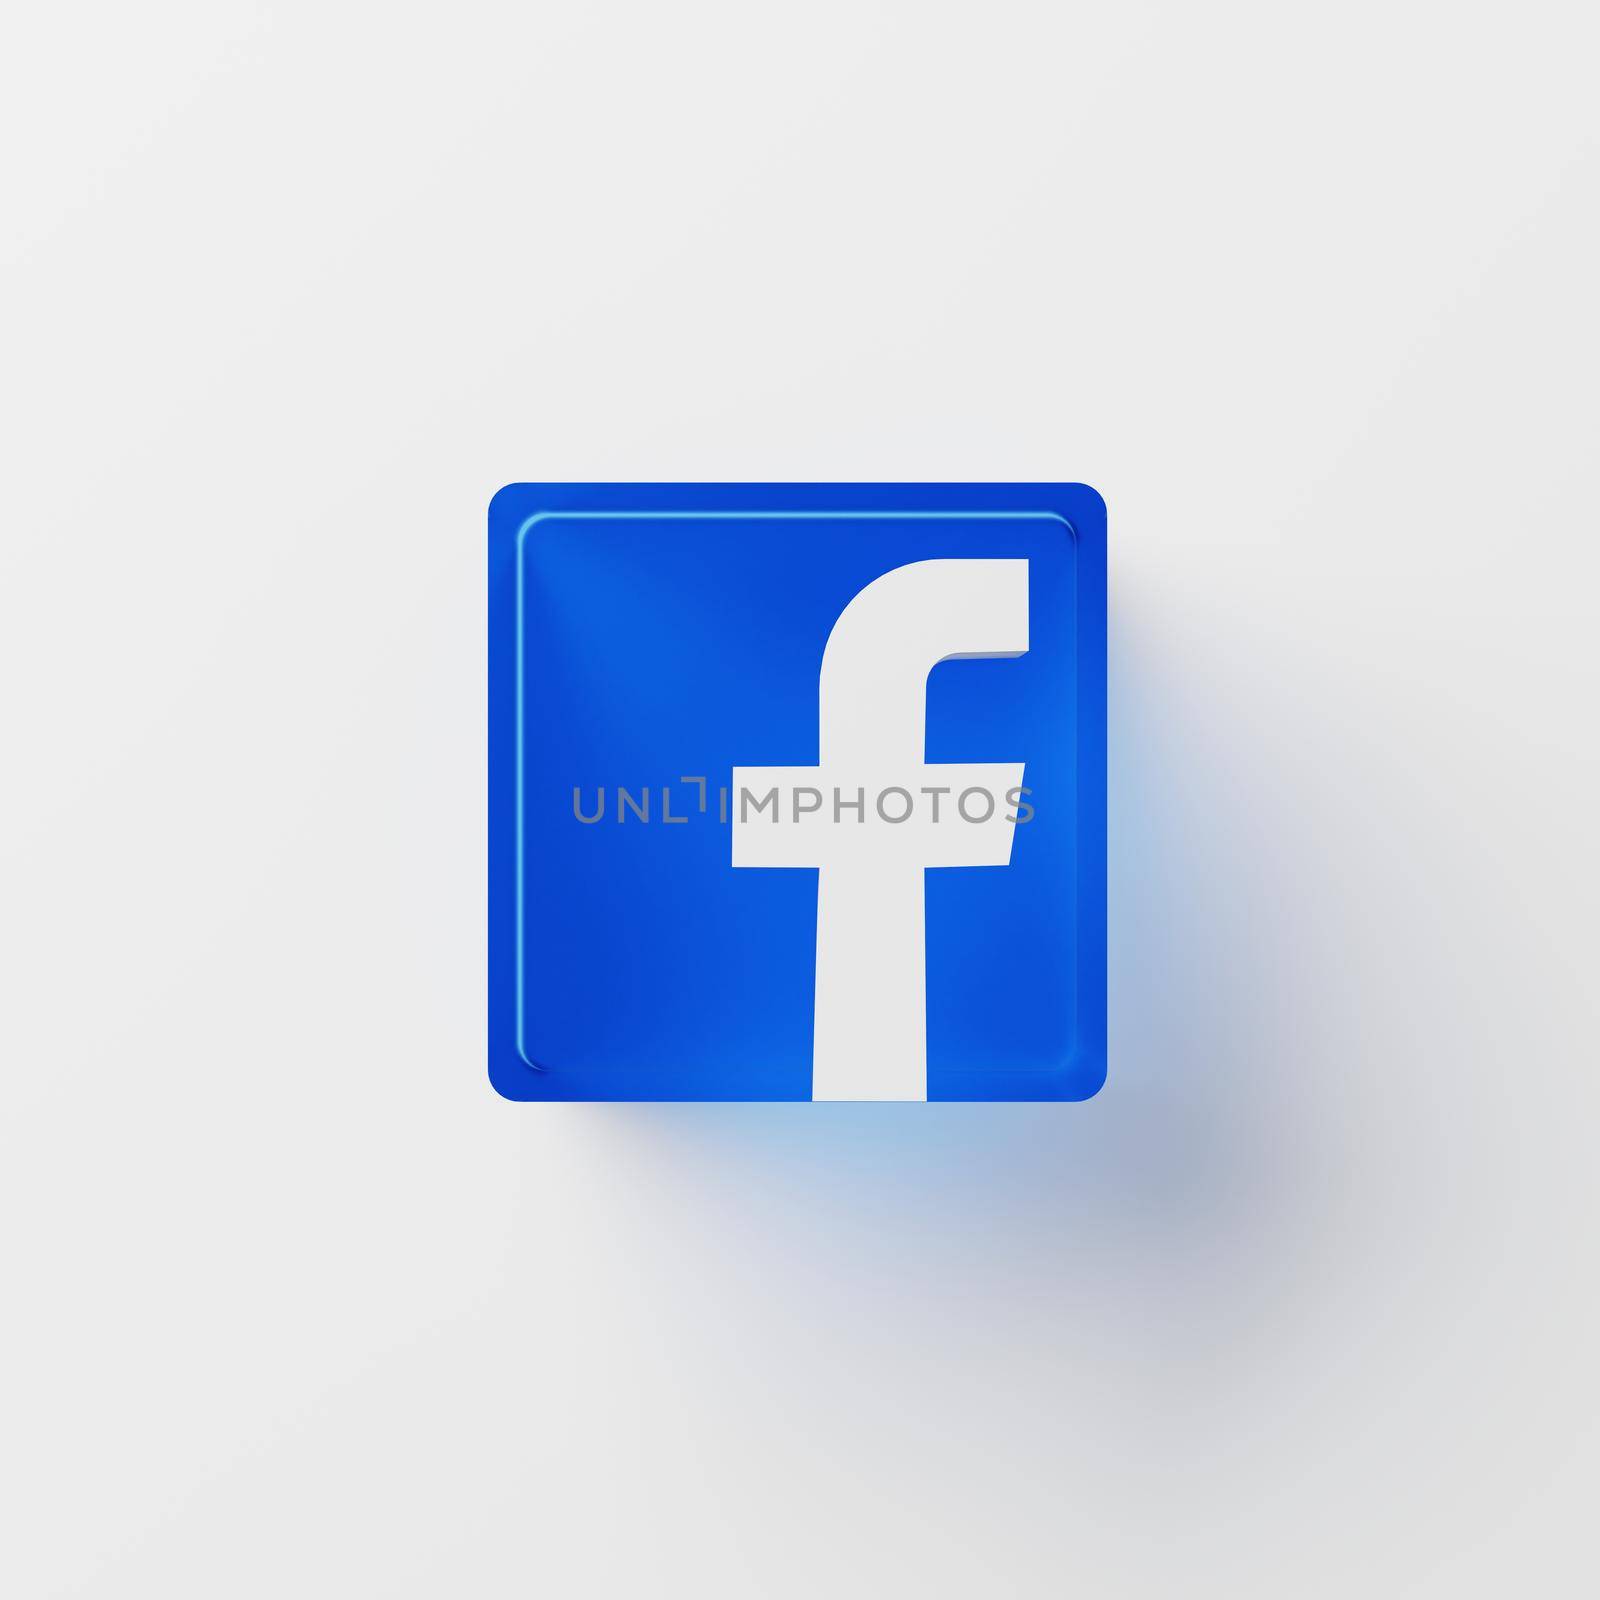 Chonburi, Thailand - Apr 15, 2021: A close up Facebook logo icon on isolated white background. Facebook is largest social media website in the world, shallow depth of field. 3D illustration rendering